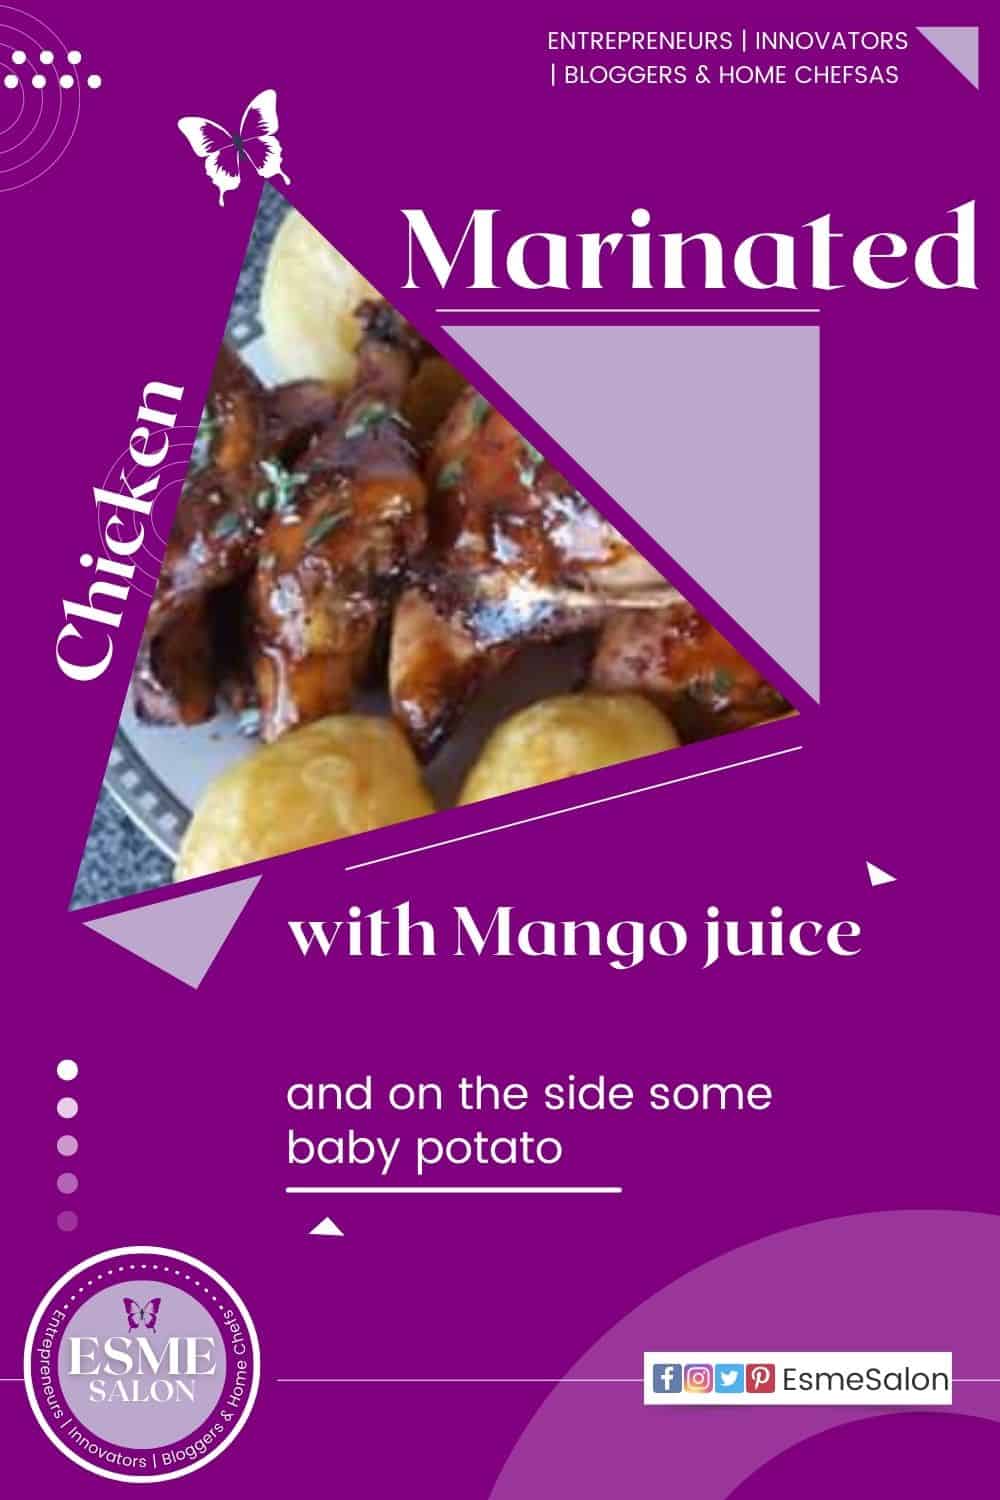 an image of Marinated Chicken with Mango juice and potatoes on the side